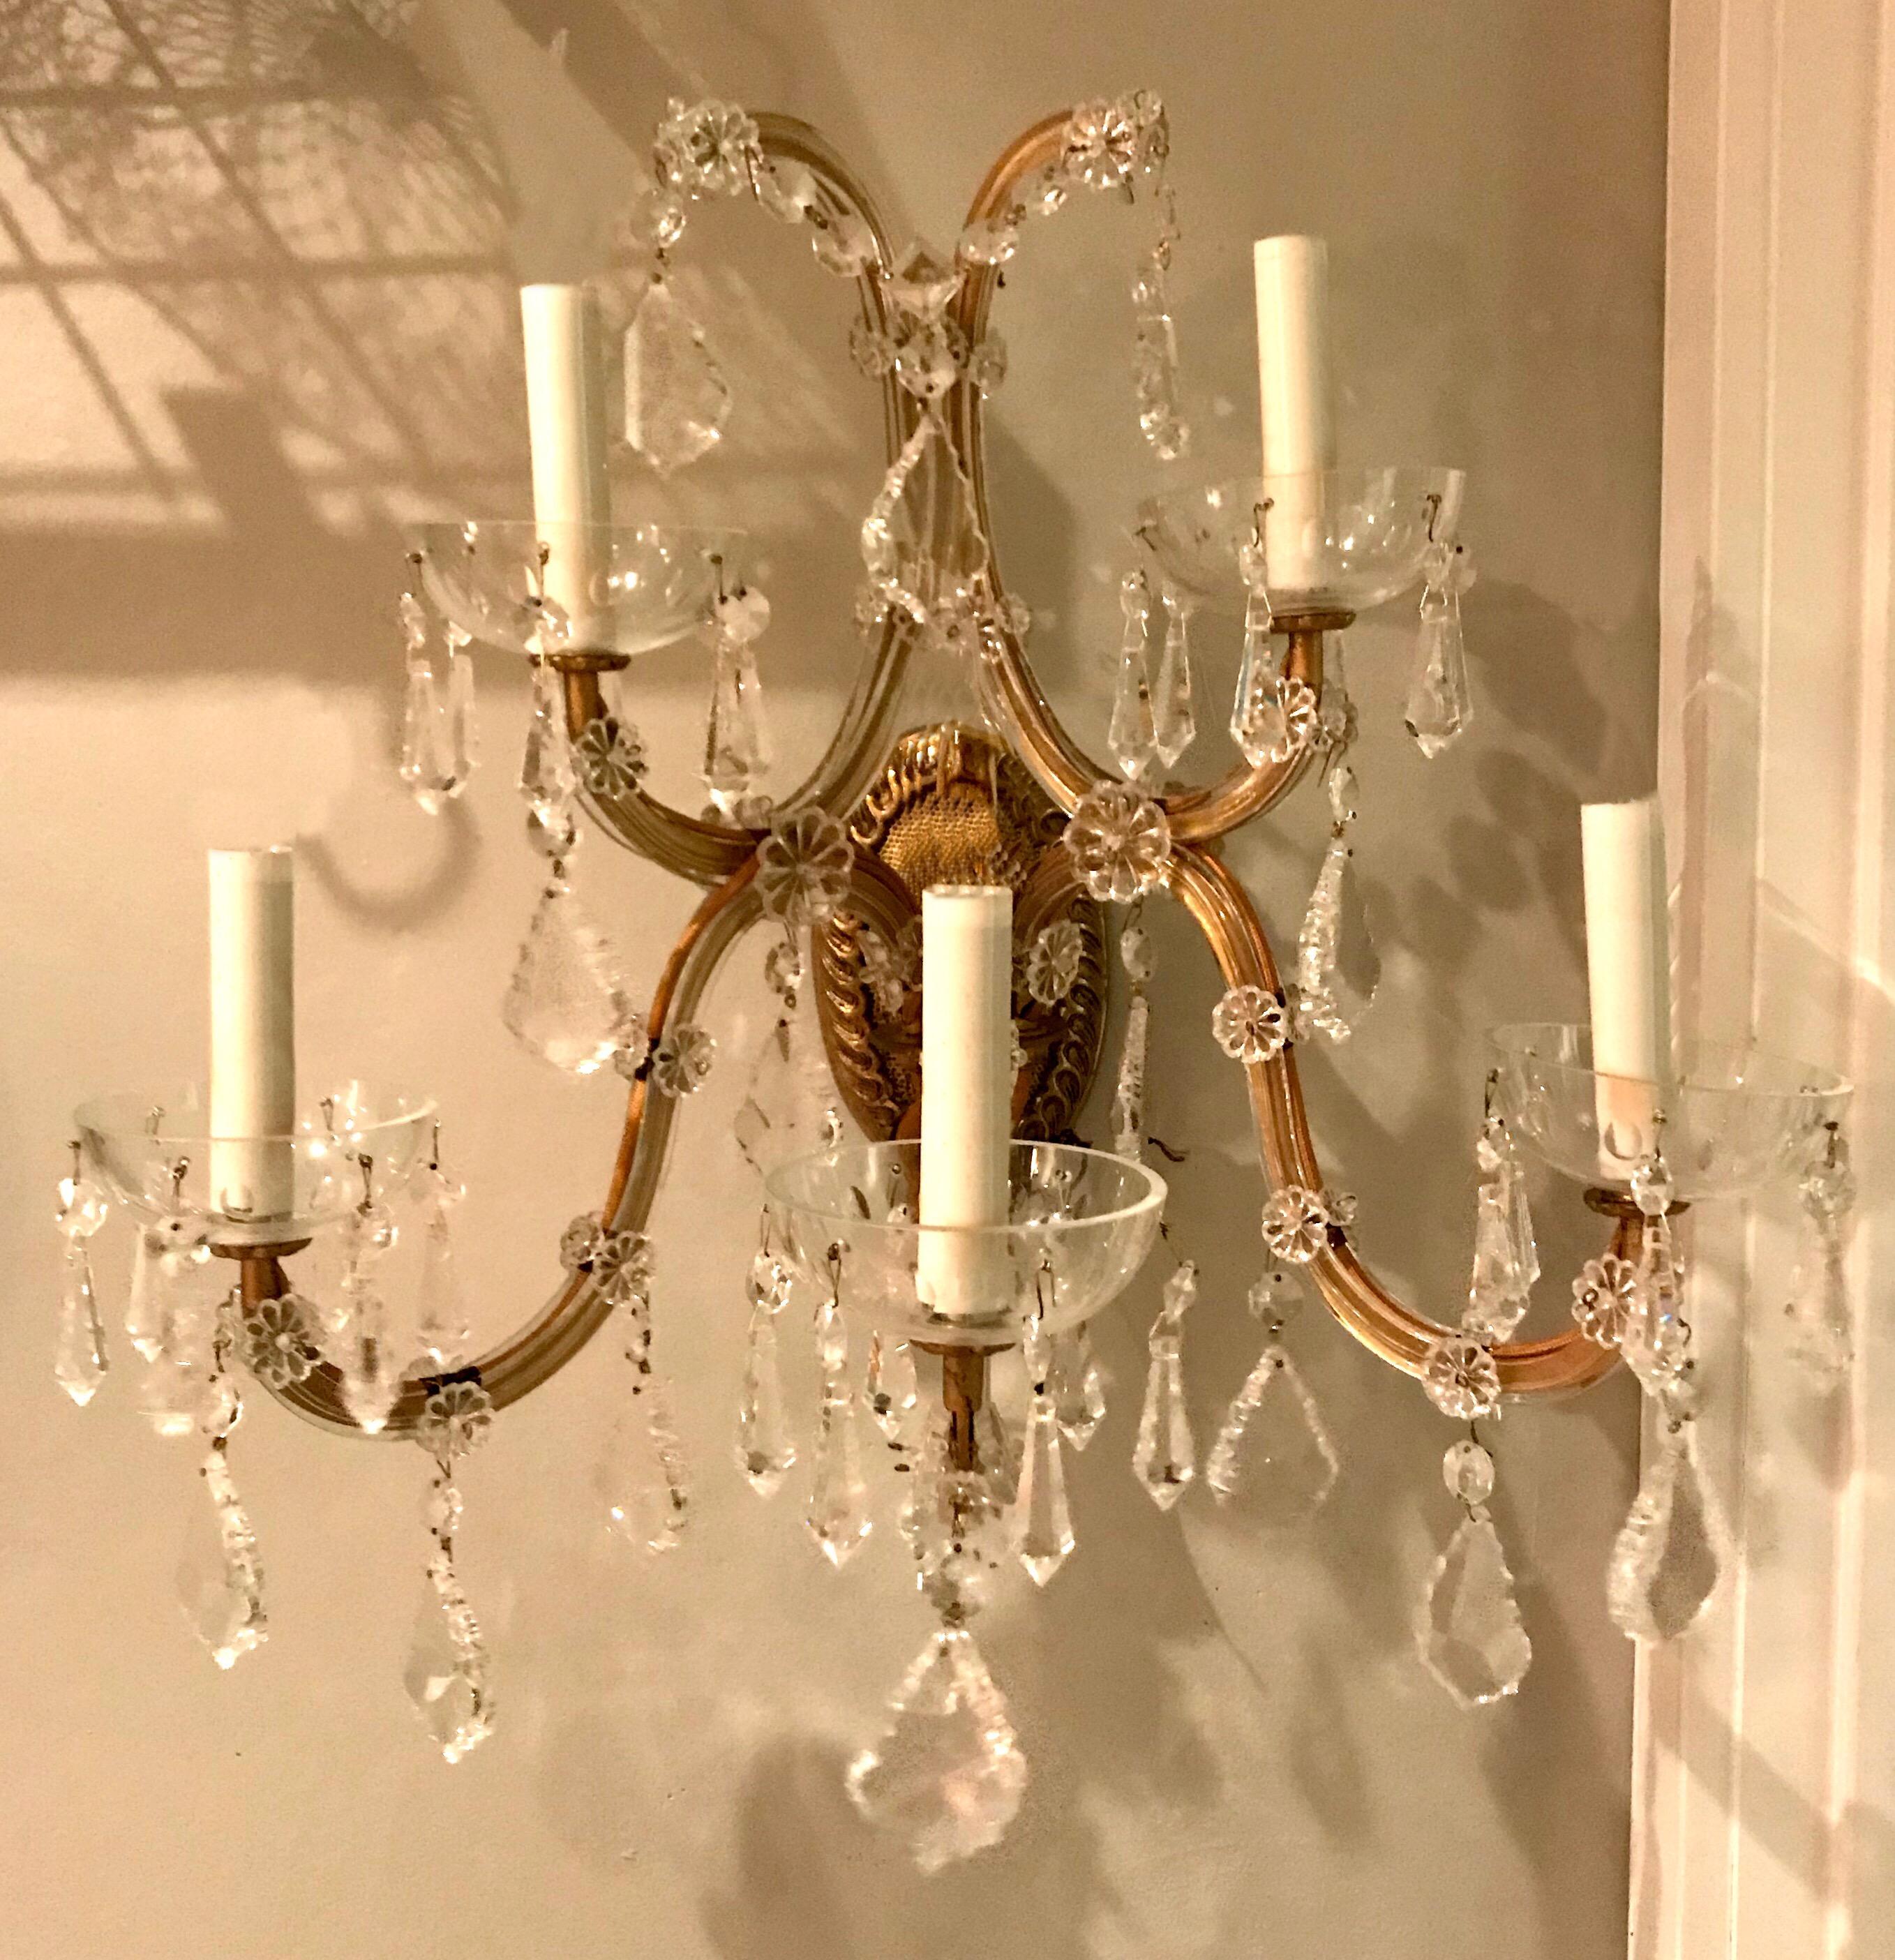 A pair of five-light vintage Italian gilt metal sconces with crystals. Each light with glass bobeche with drop crystals.